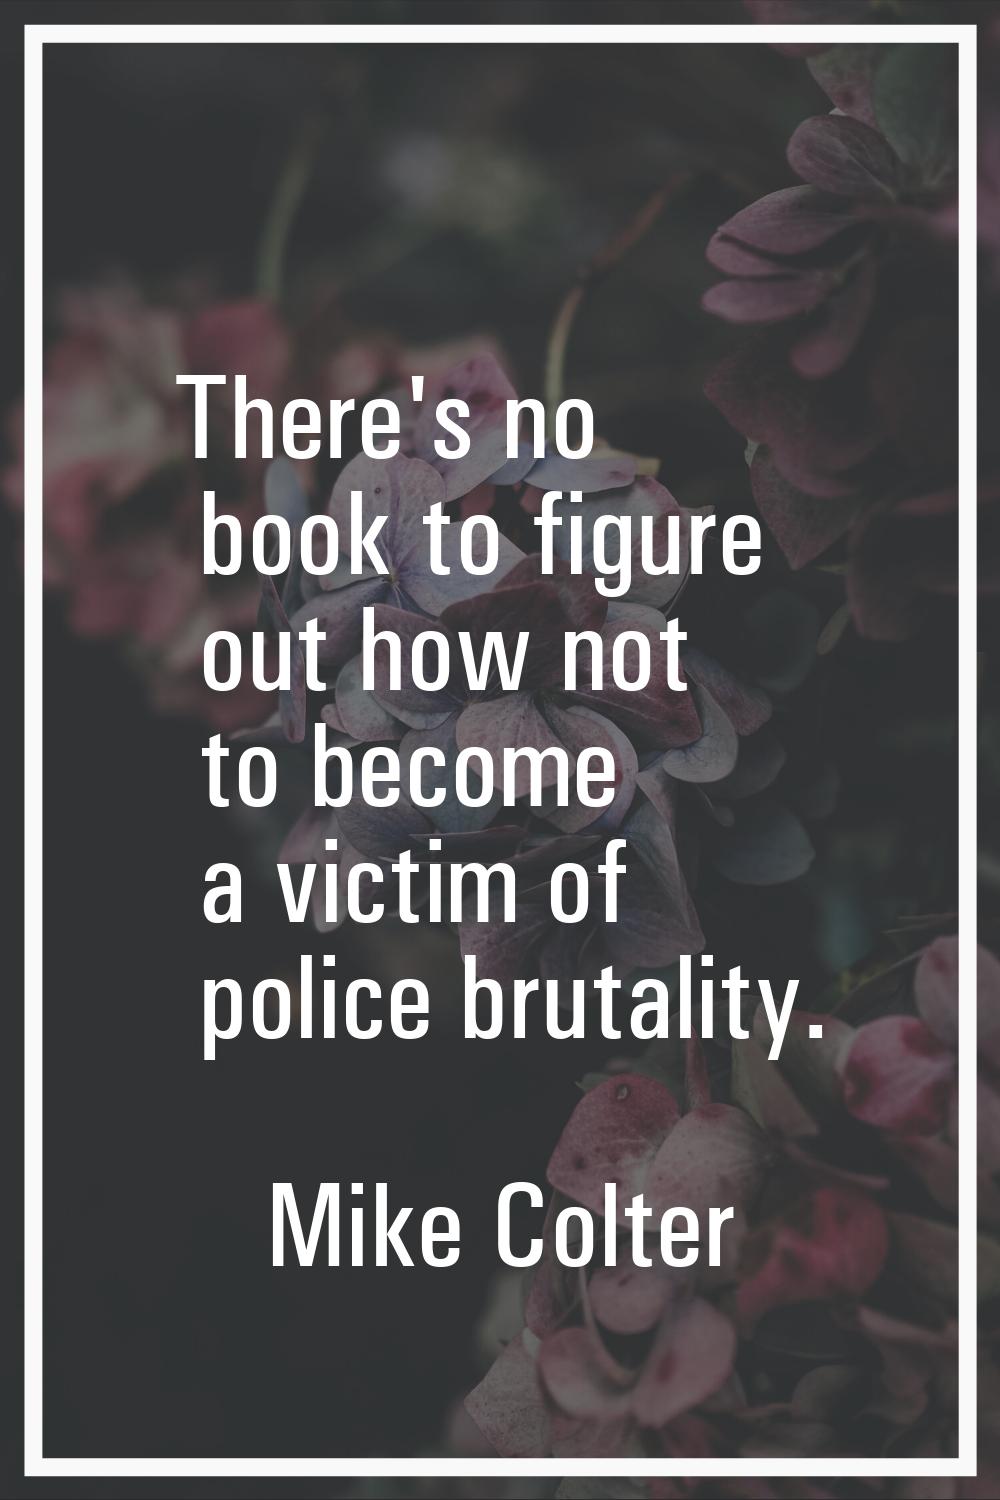 There's no book to figure out how not to become a victim of police brutality.